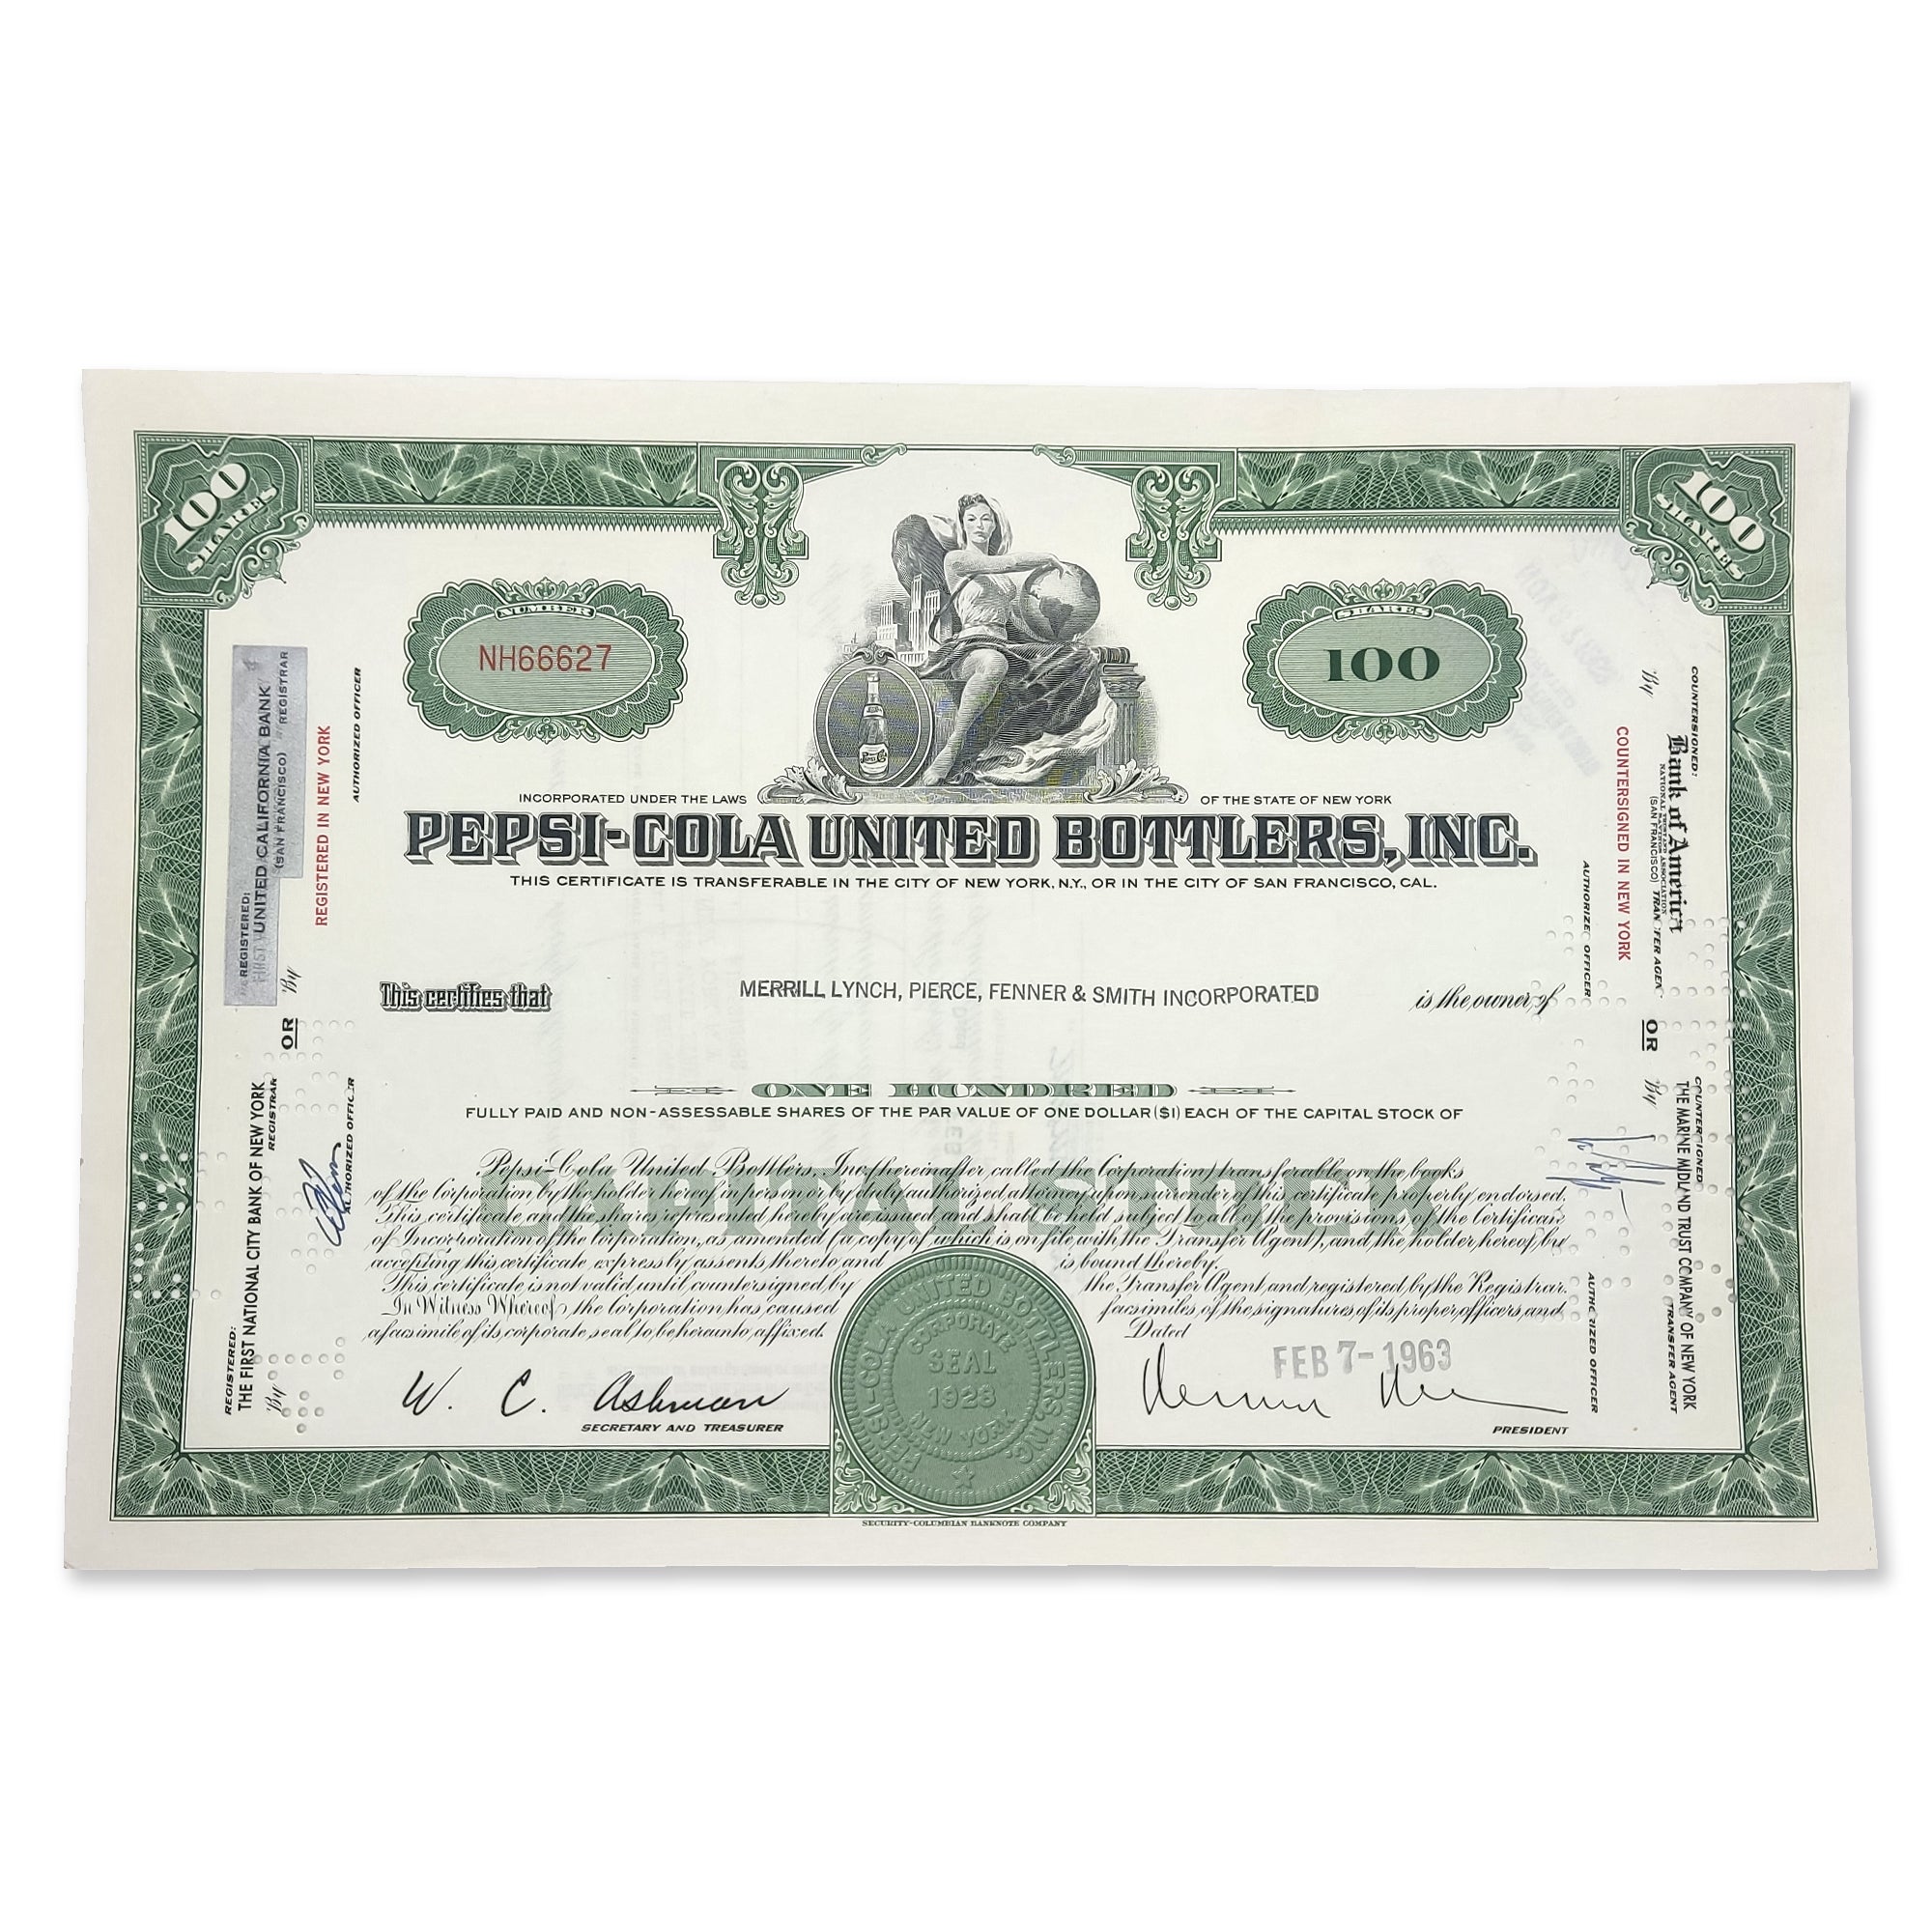 Collectible Stocks Certificate - PEPSI-COLA United Bottlers, Inc